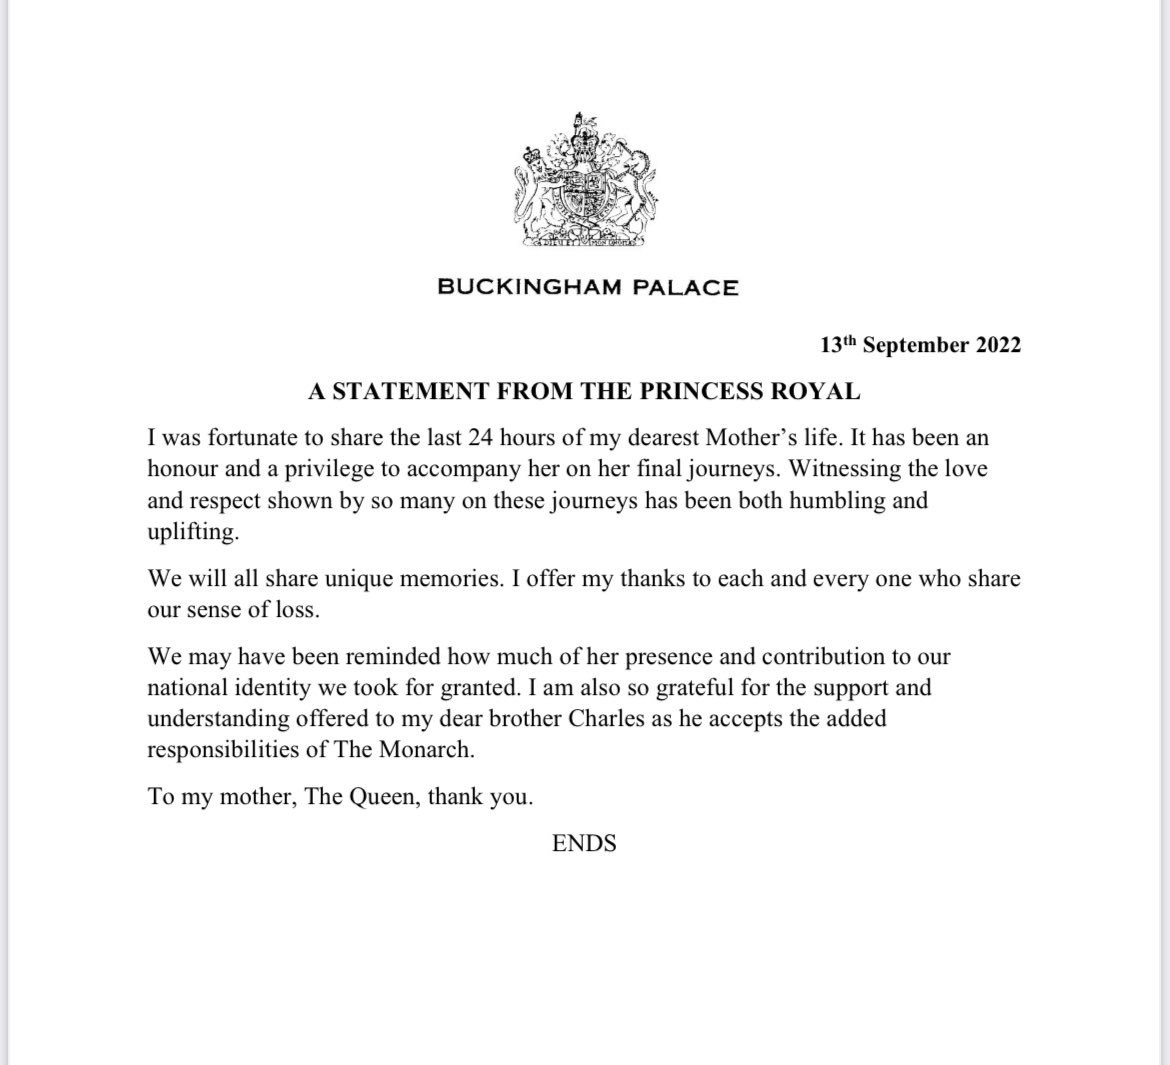 Statement by Her Royal Highness The Princess Royal